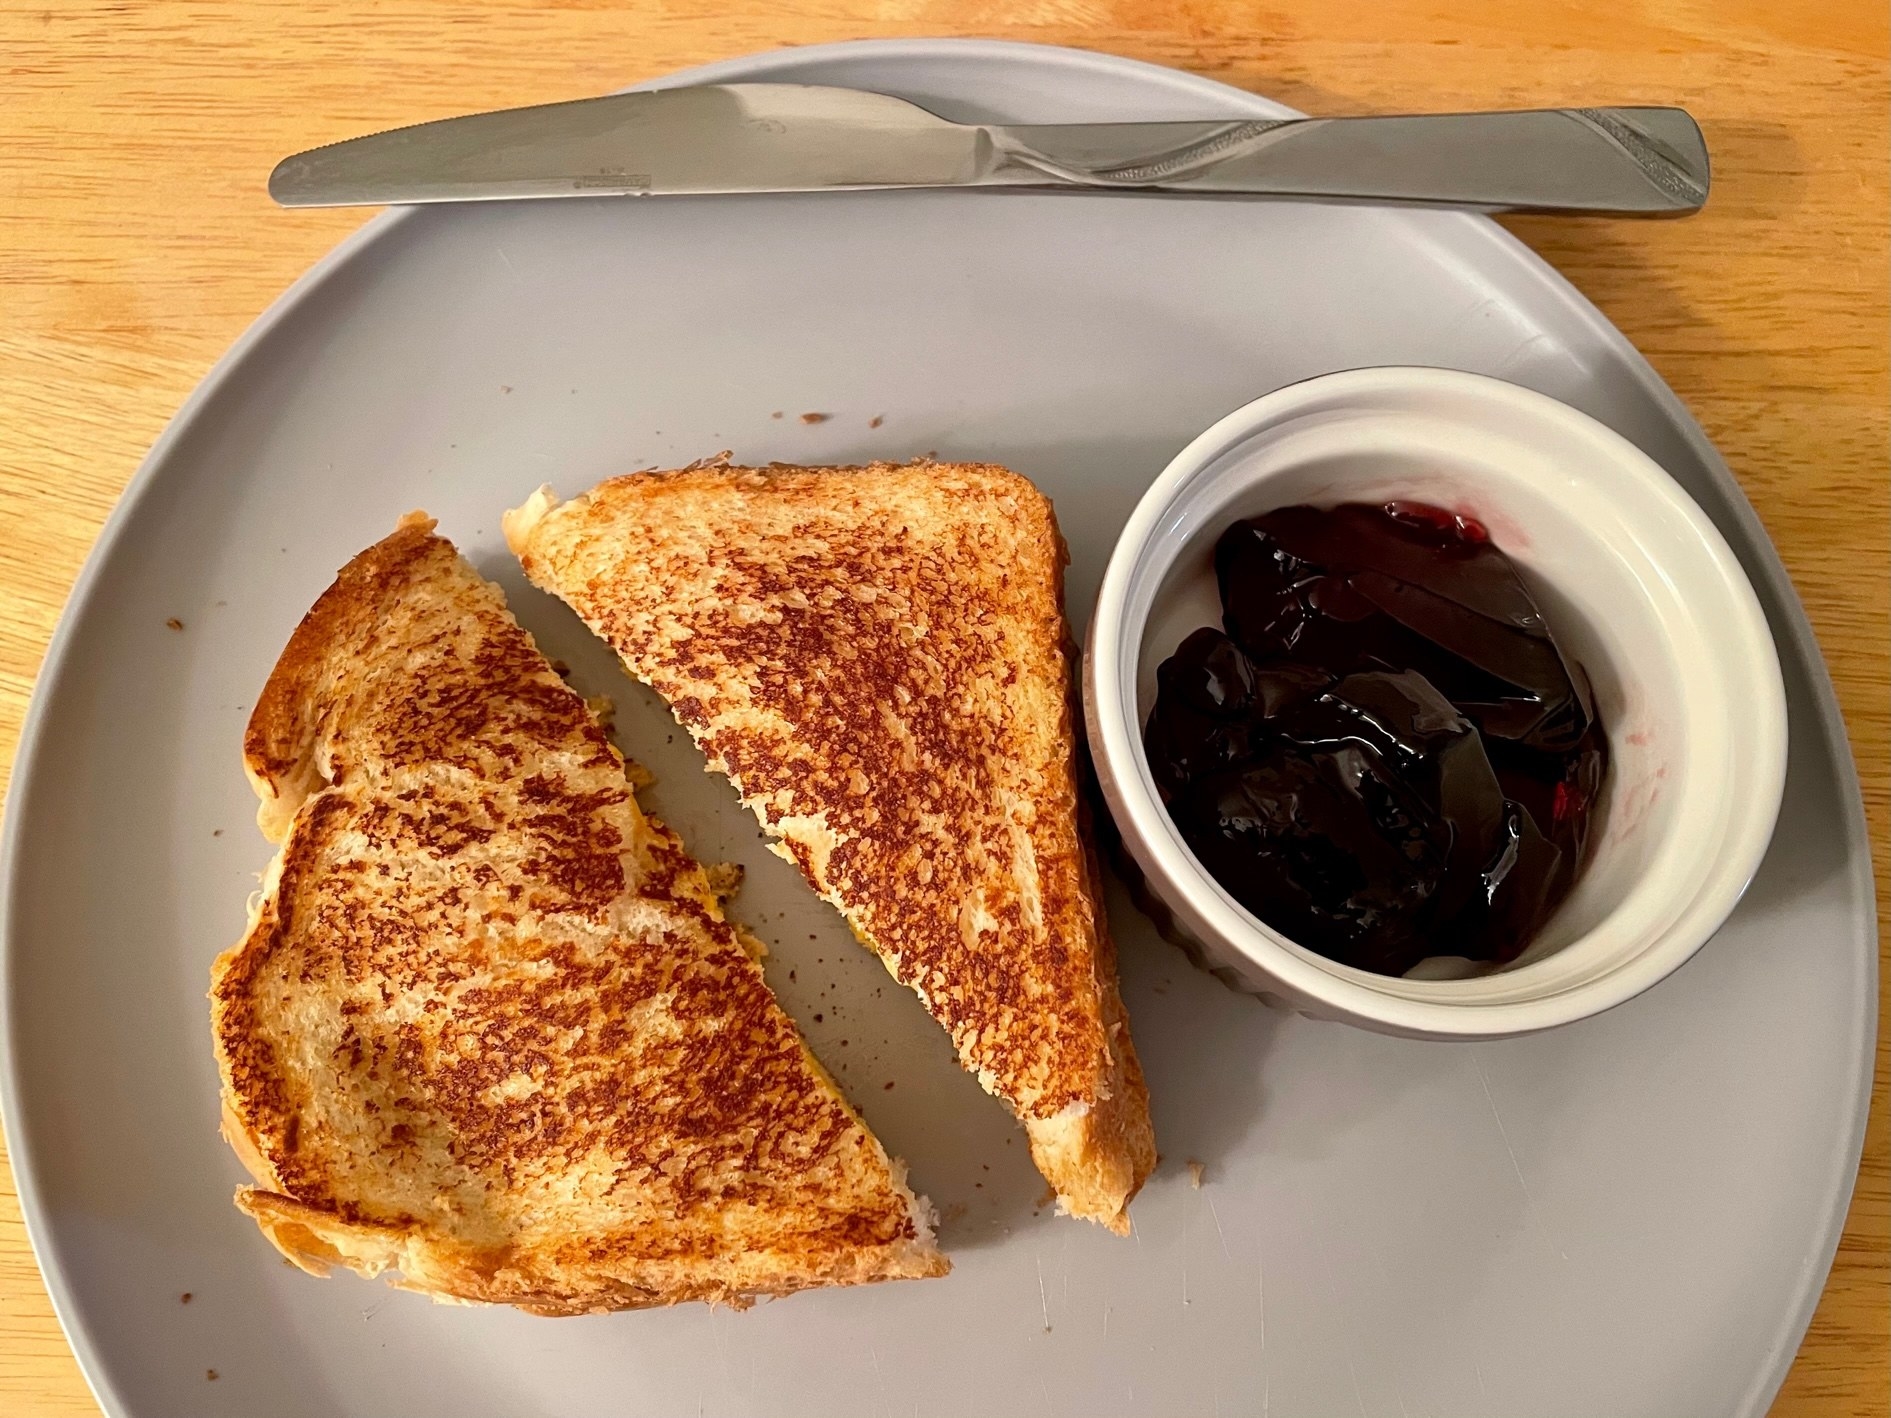 Grilled cheese and jelly